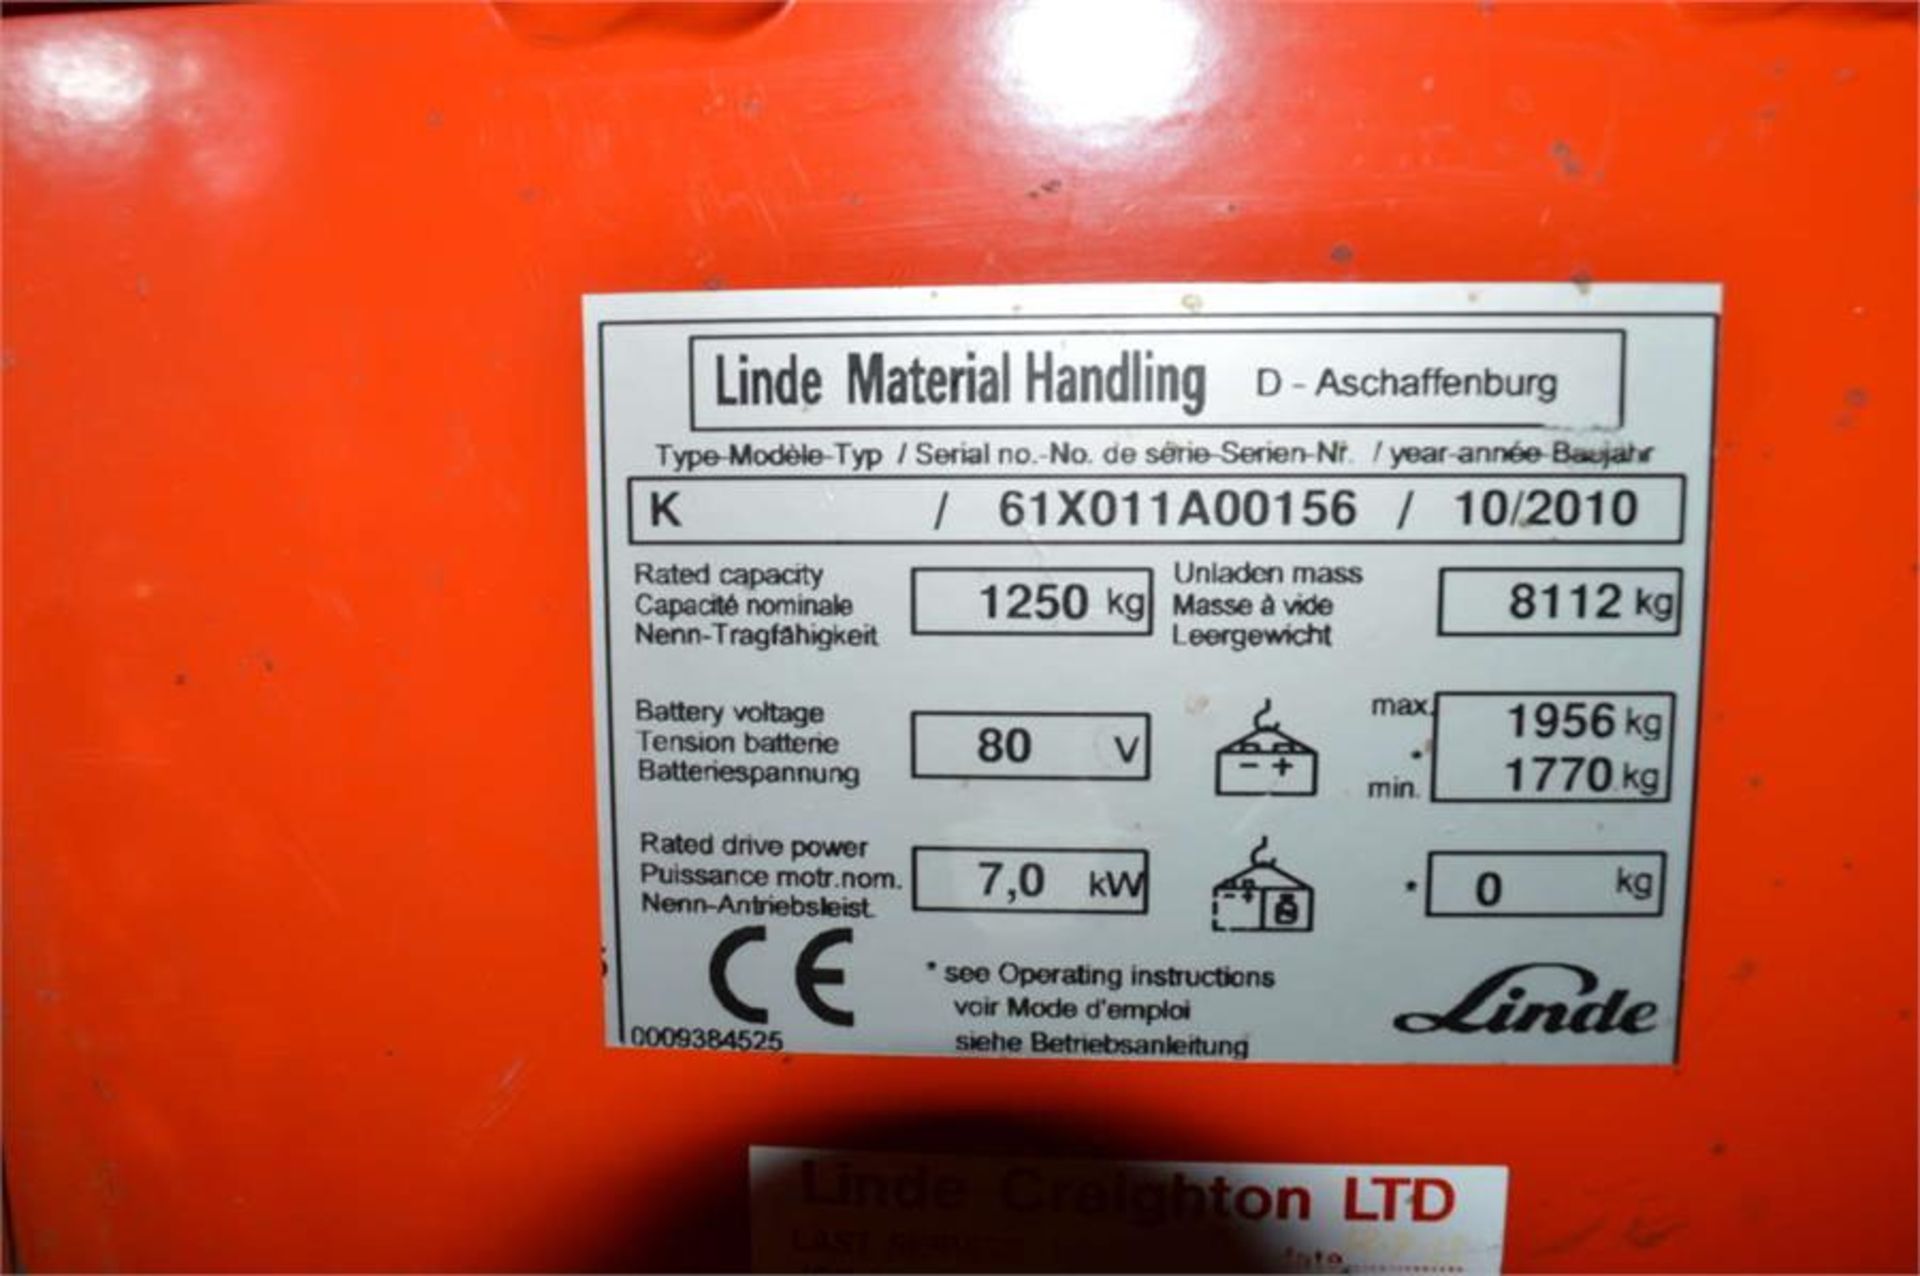 2010 Linde Electric Fork Lift Truck – Type K 1250kg Very narrow aisle electric high level order - Image 3 of 7